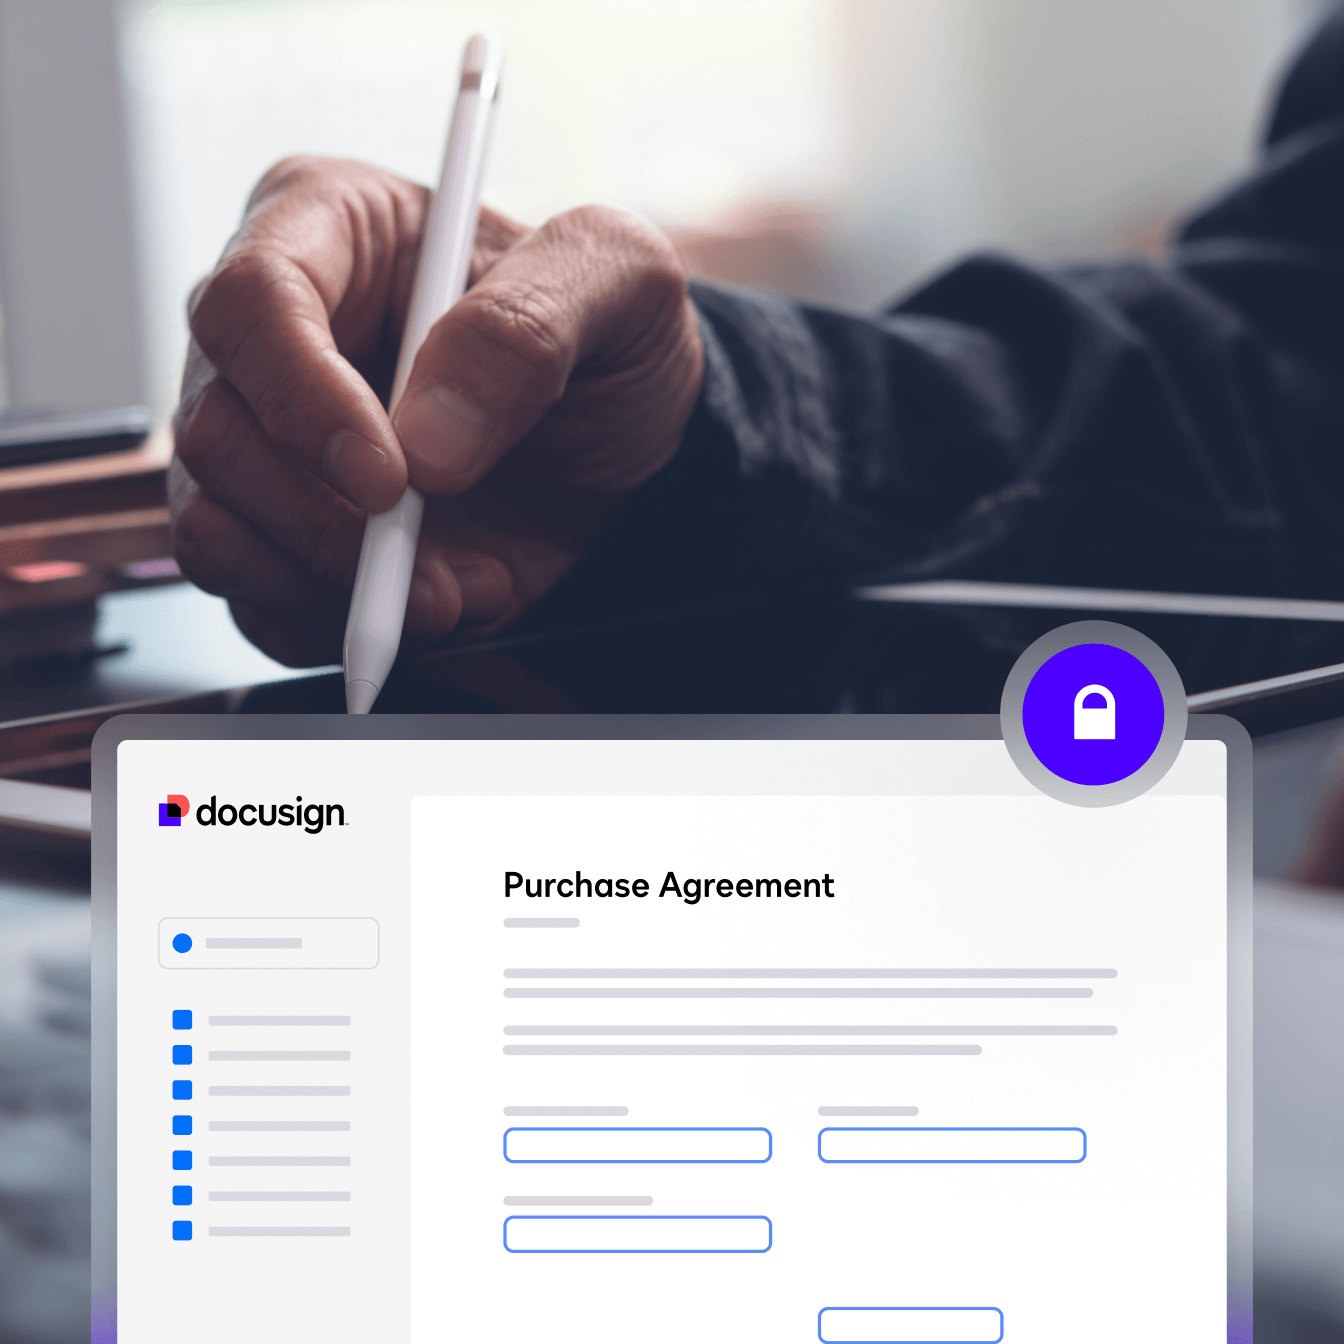 A secure purchase agreement in Docusign